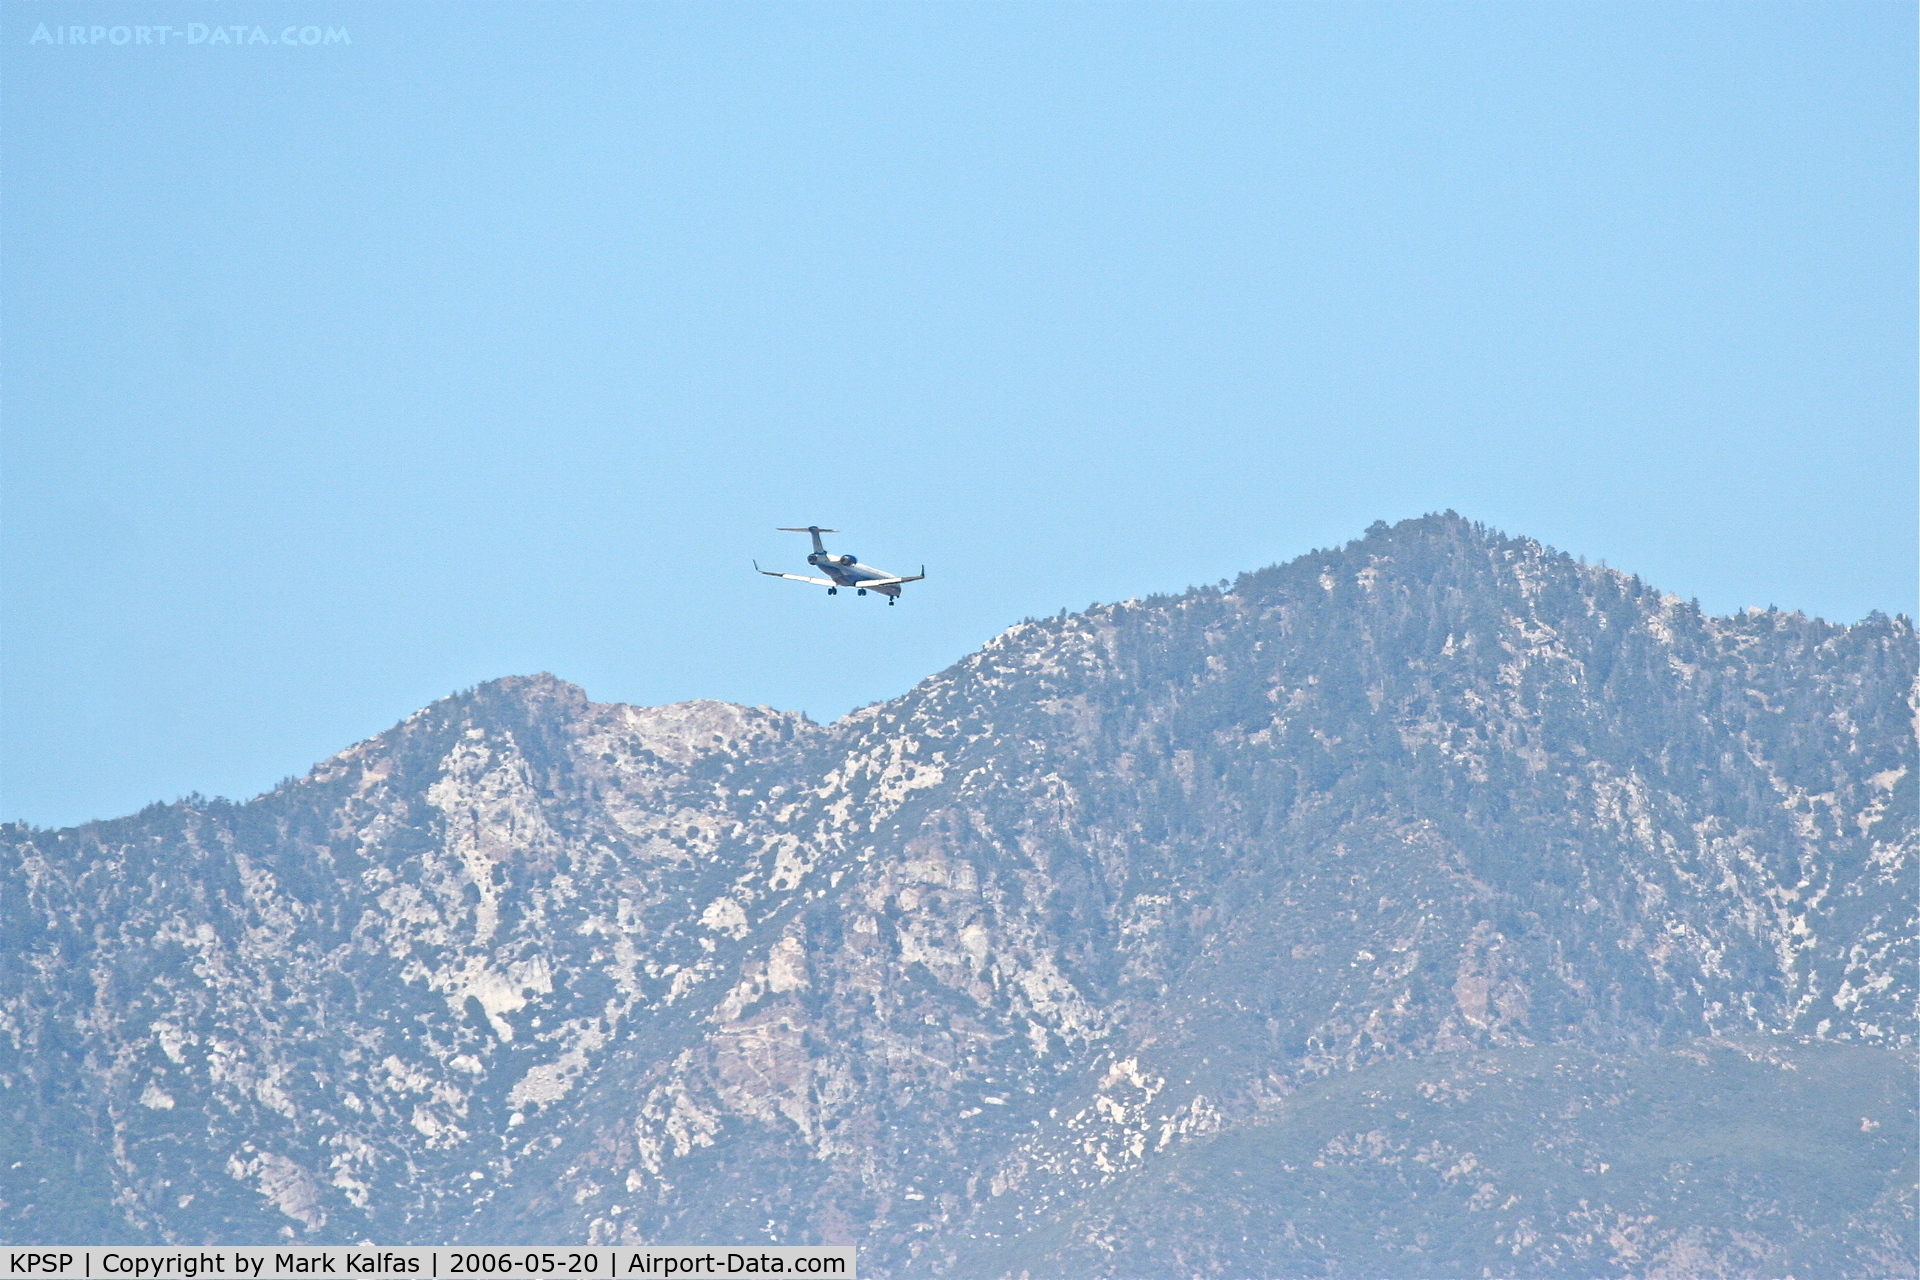 Palm Springs International Airport (PSP) - SkyWest Bombardier CL-600-2C10, on approach to 31L KPSP.